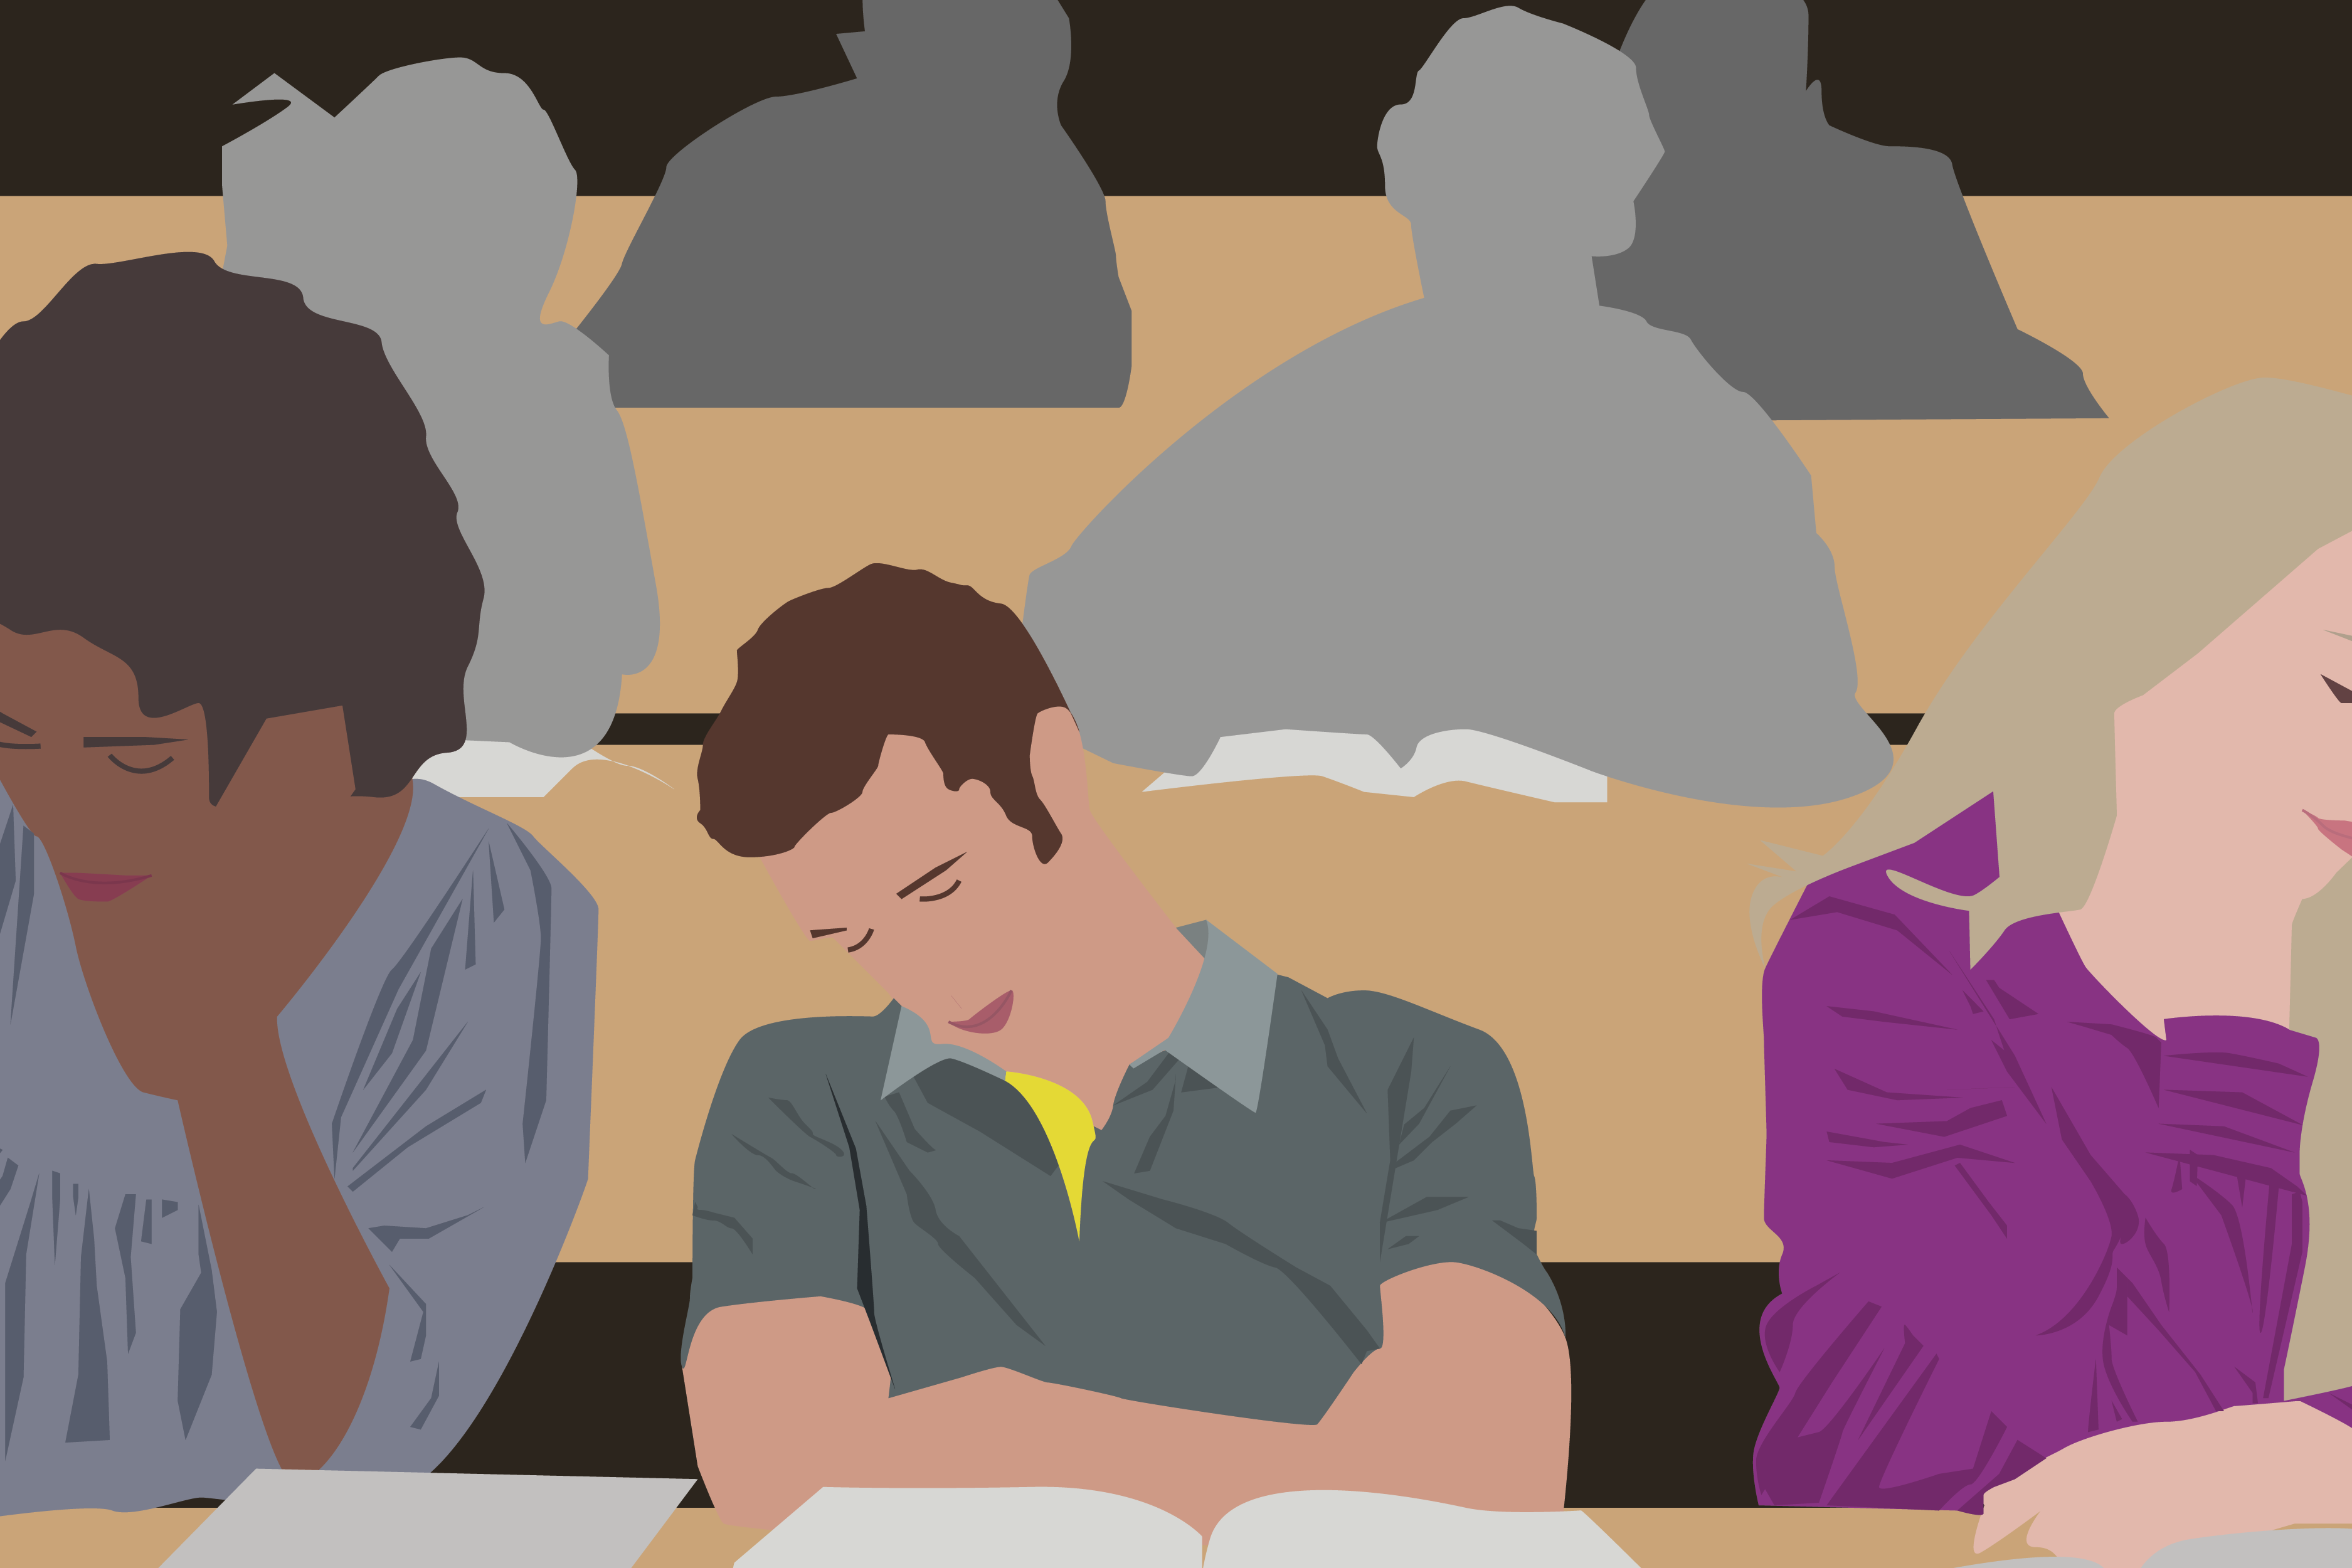 college students in class clipart